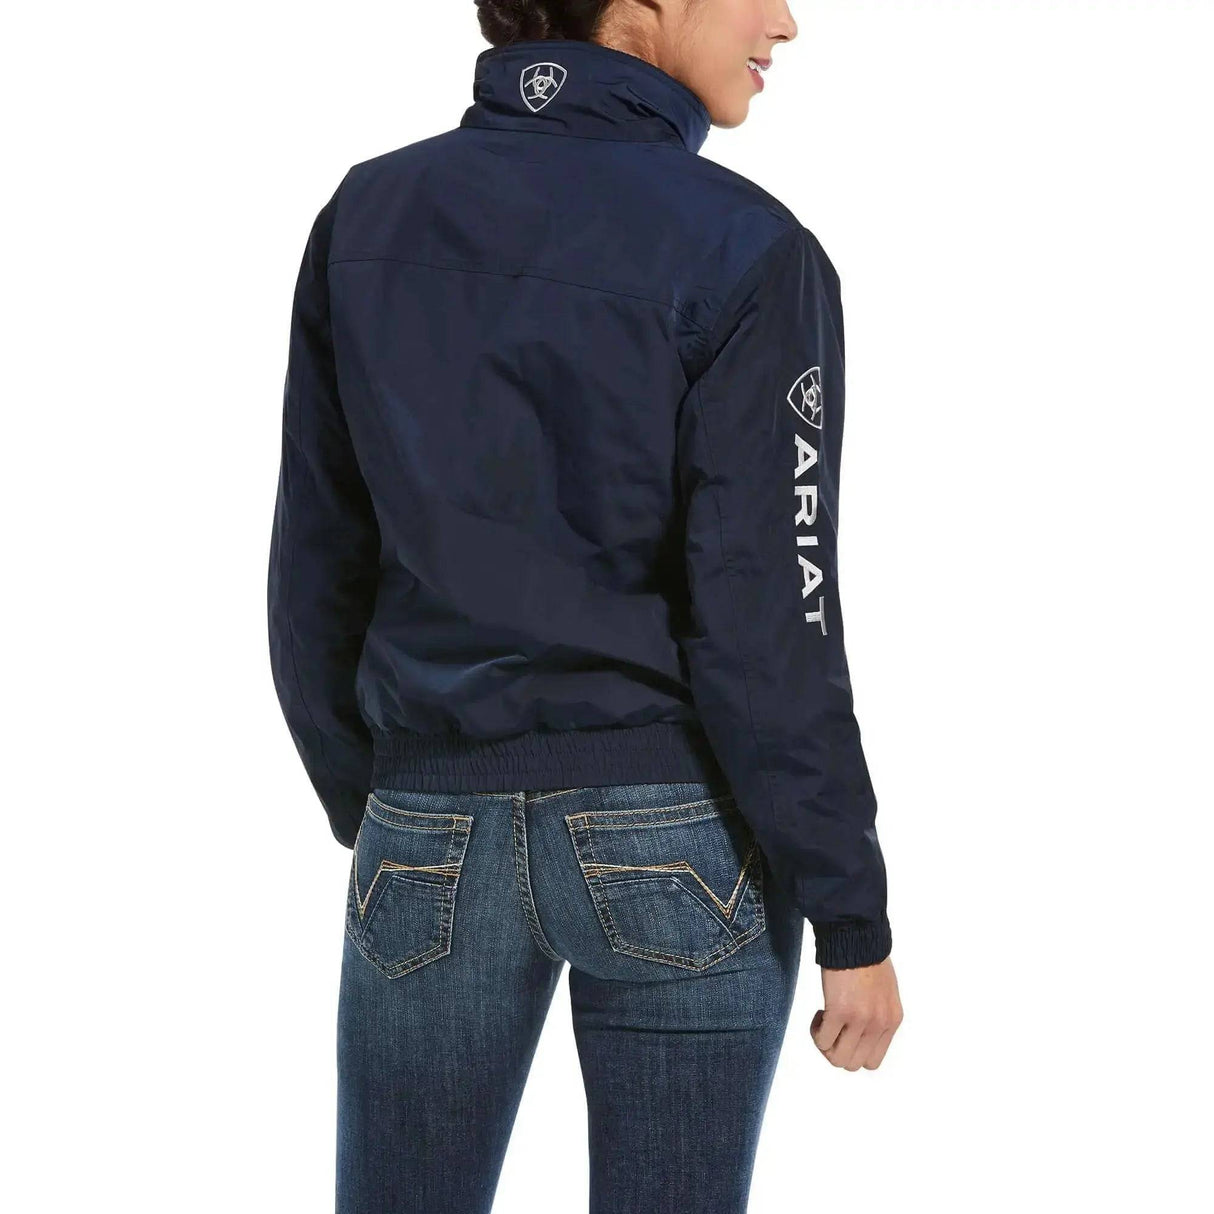 Ariat Womens Stable Jacket Extra Small Navy Ariat Outdoor Coats & Jackets Barnstaple Equestrian Supplies